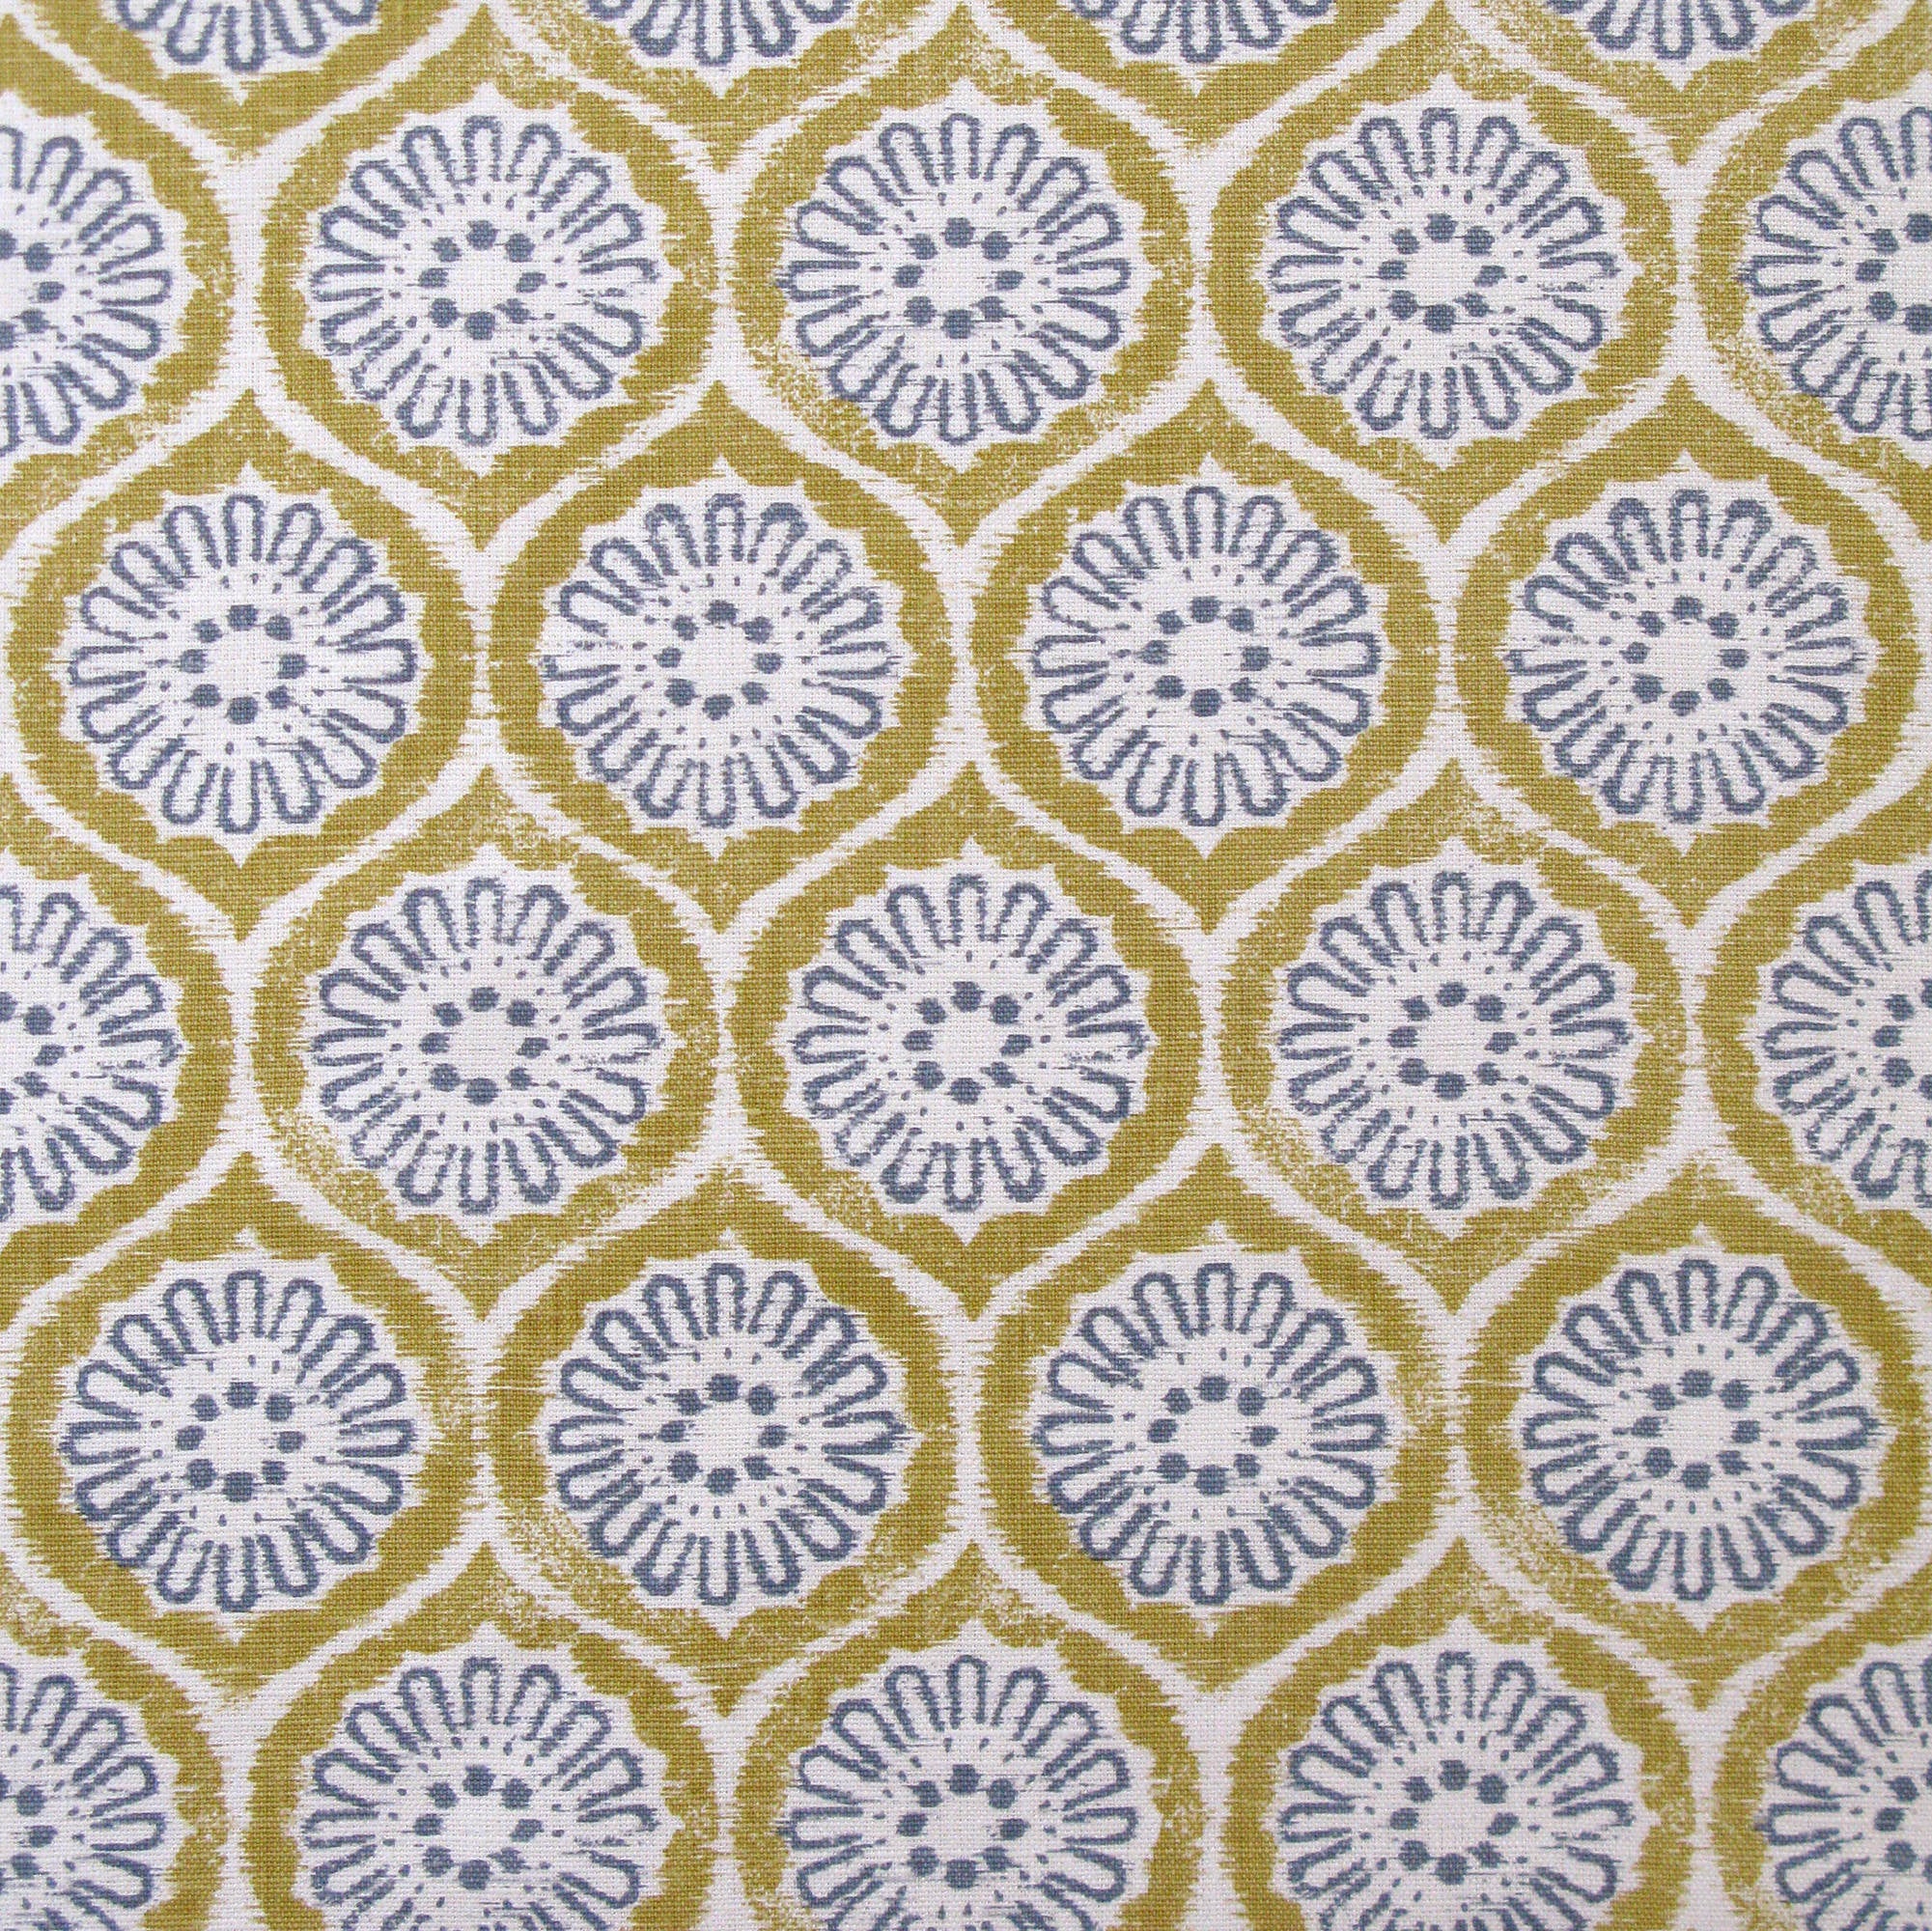 Detail of fabric in a floral lattice print in blue and mustard on a cream field.